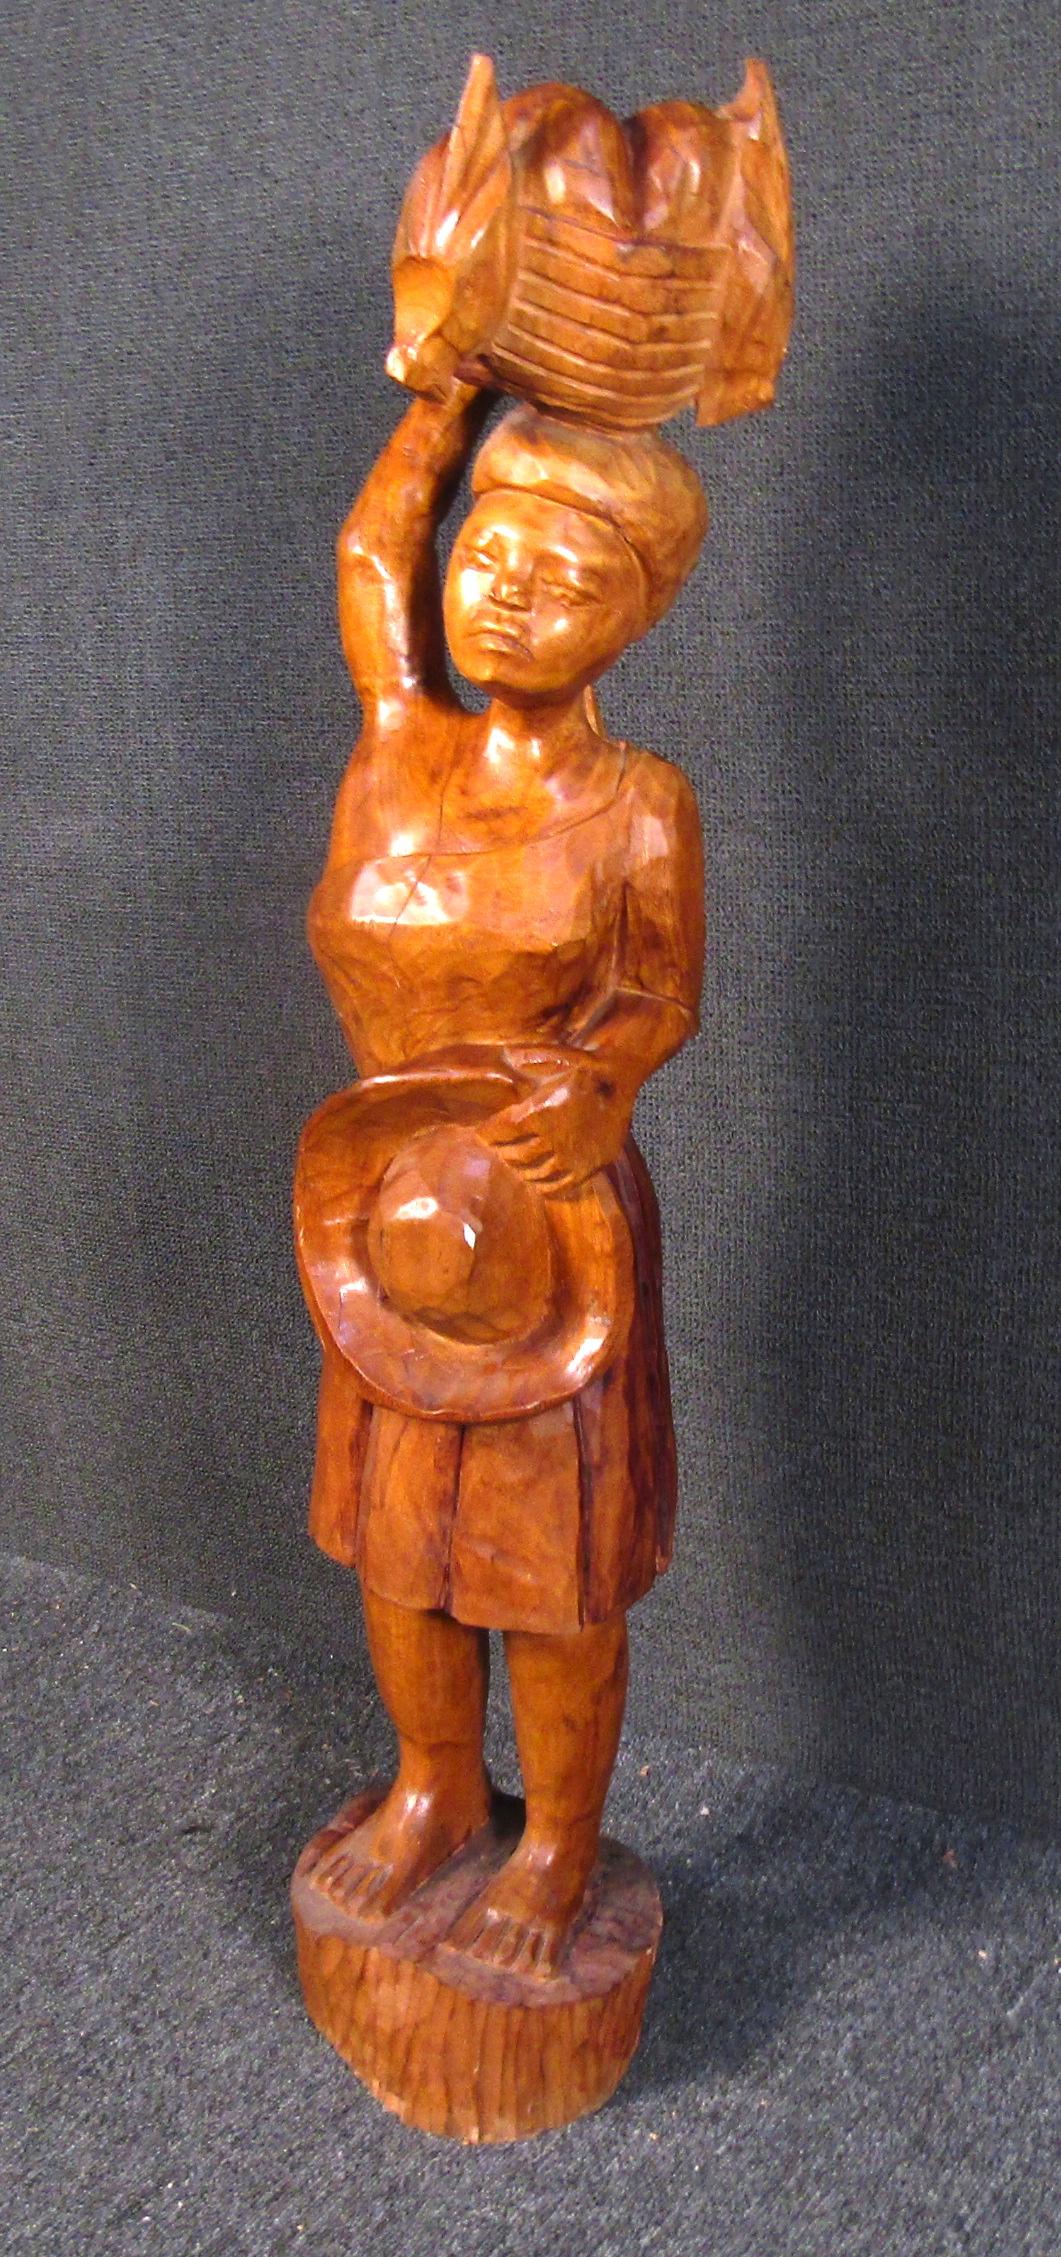 Primitive Unique African Style Carved Wood Wooden Sculpture For Sale